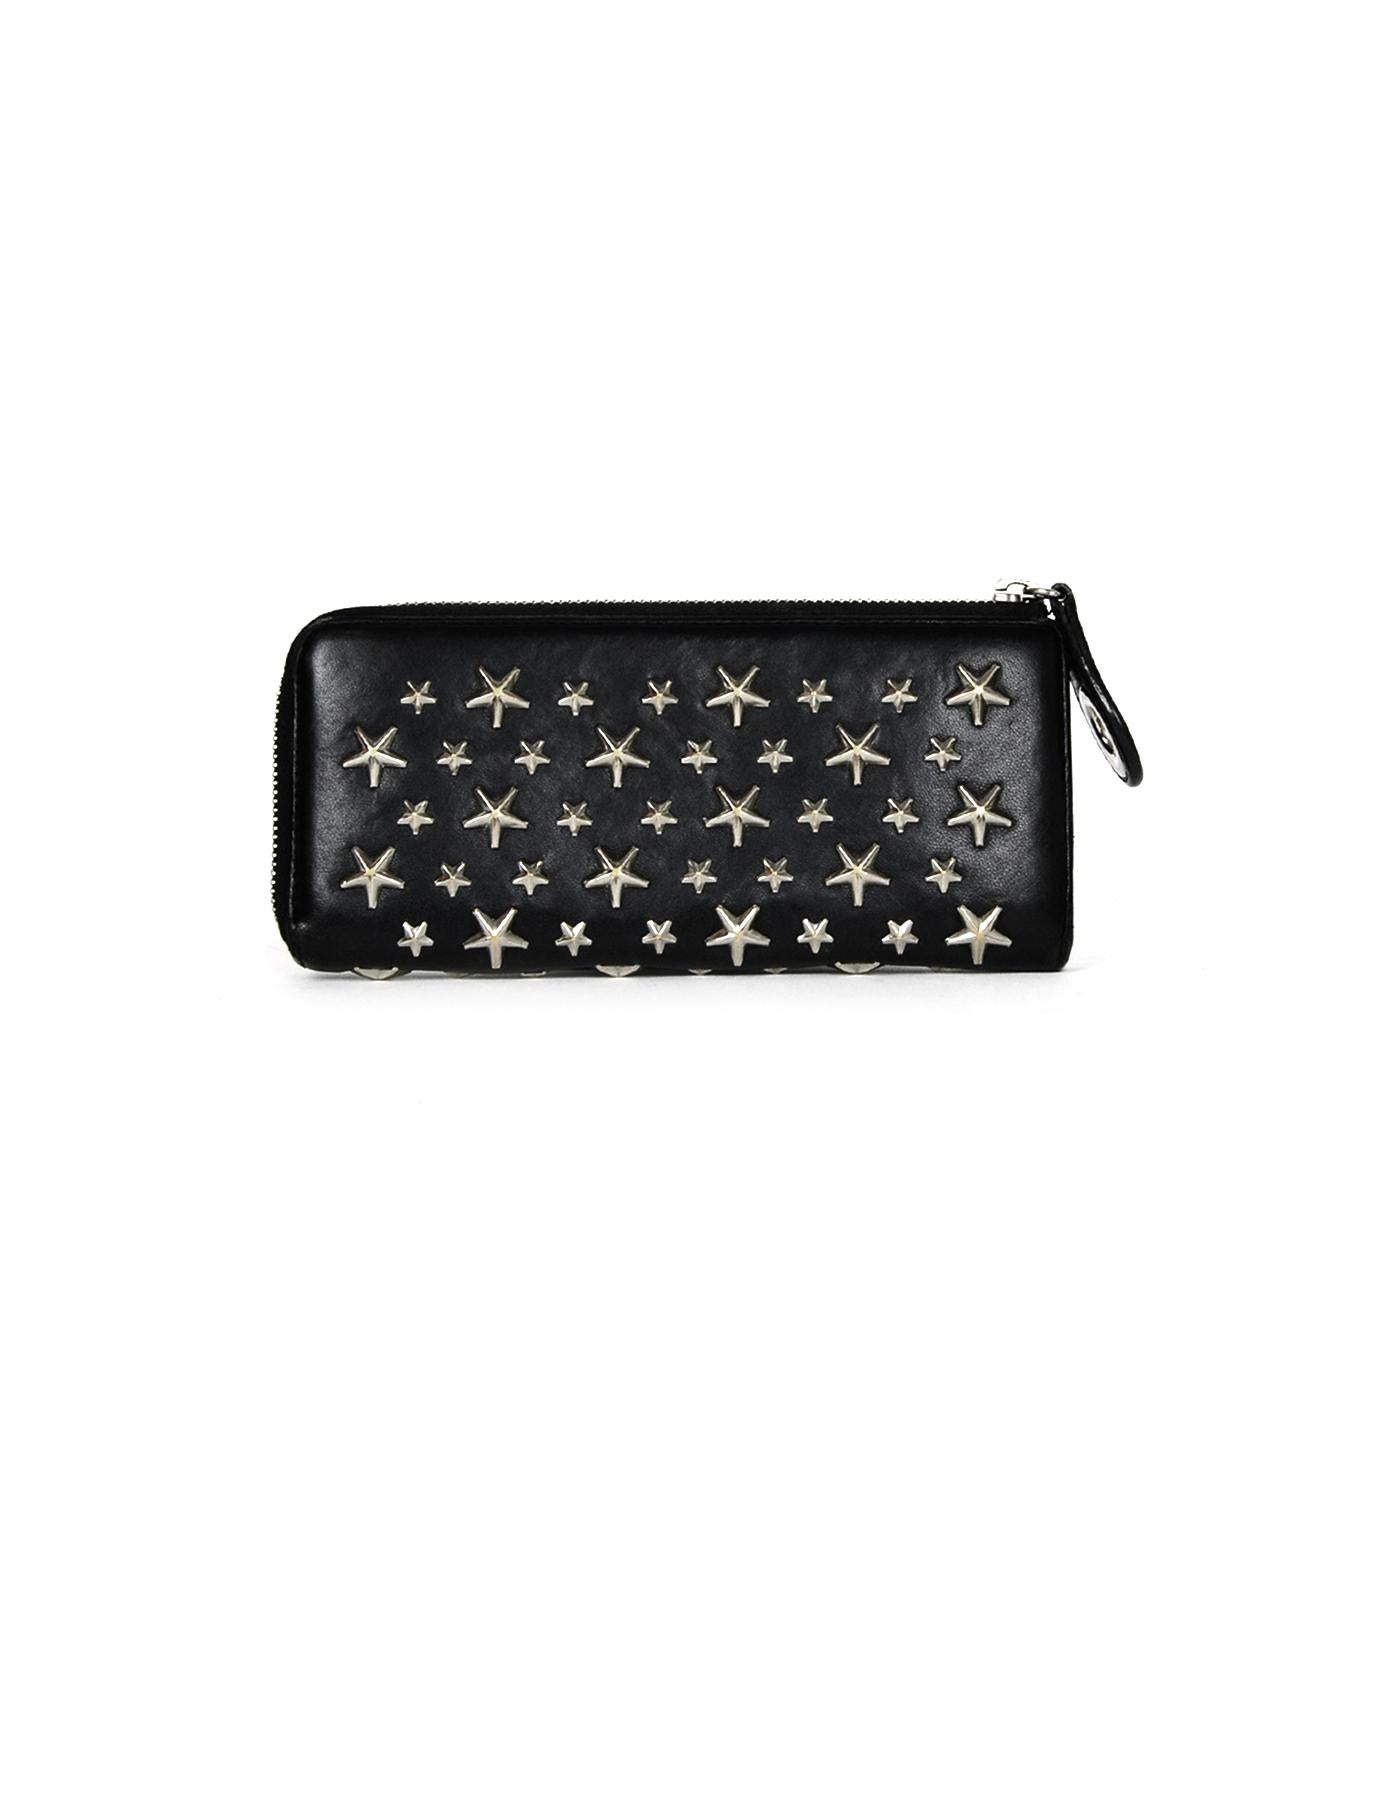 Jimmy Choo Black Leather Star Studded Zip Around Wallet 

Made In: Italy
Color: Black
Hardware: Silvertone
Materials: Leather
Lining: Leather and fine textile lining
Closure/Opening: Top zip
Exterior Pockets: None
Interior Pockets: Eight card